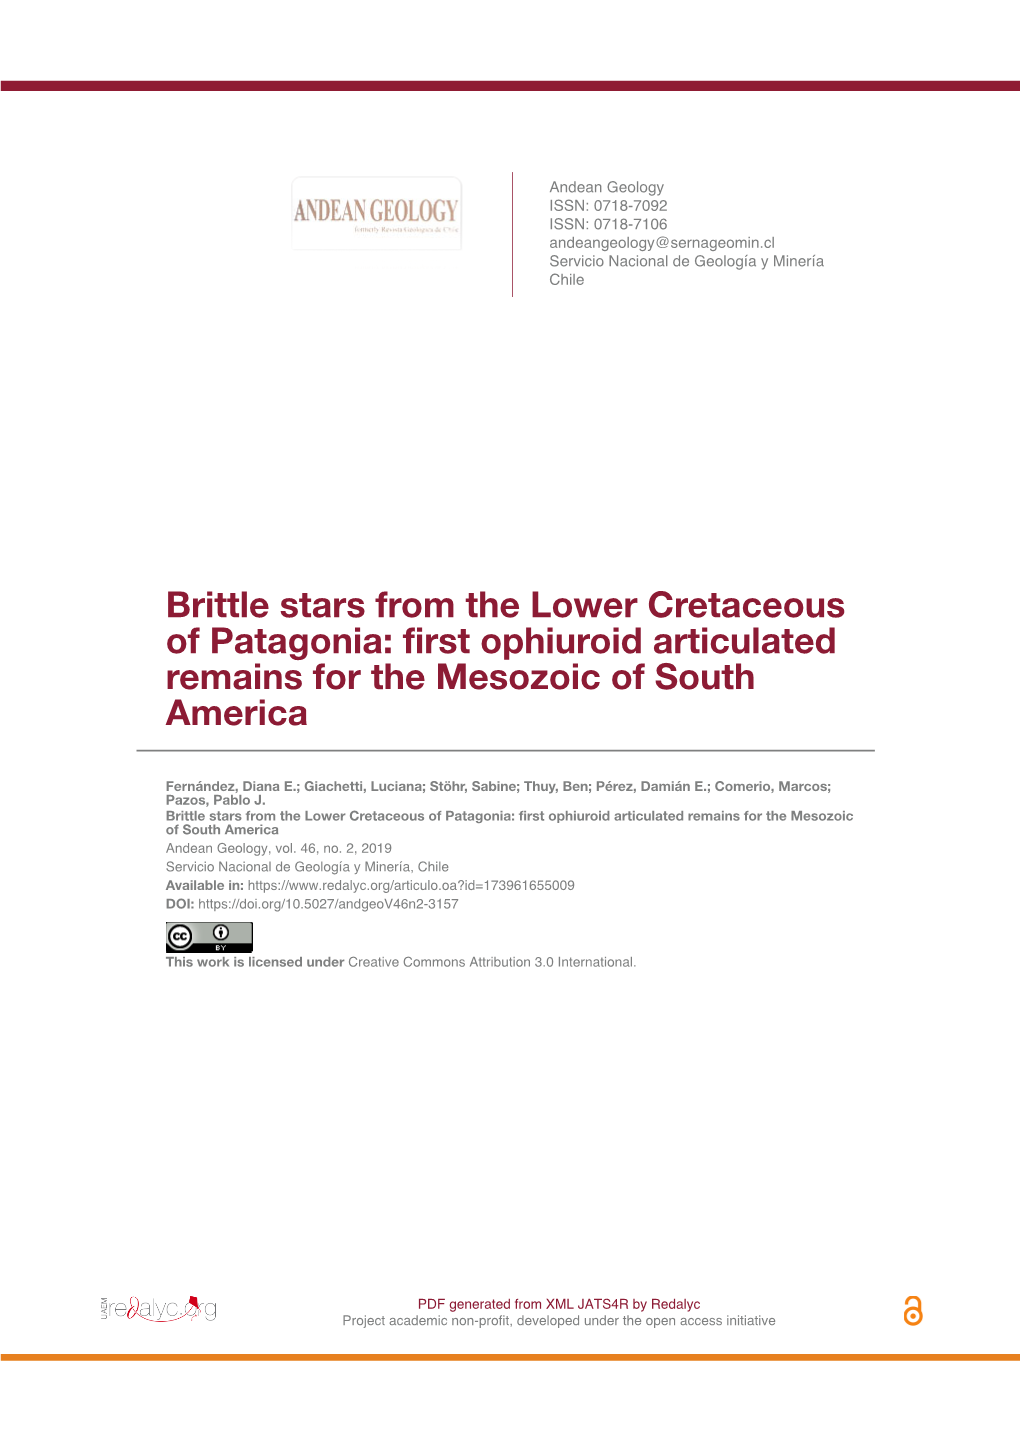 Brittle Stars from the Lower Cretaceous of Patagonia: First Ophiuroid Articulated Remains for the Mesozoic of South America